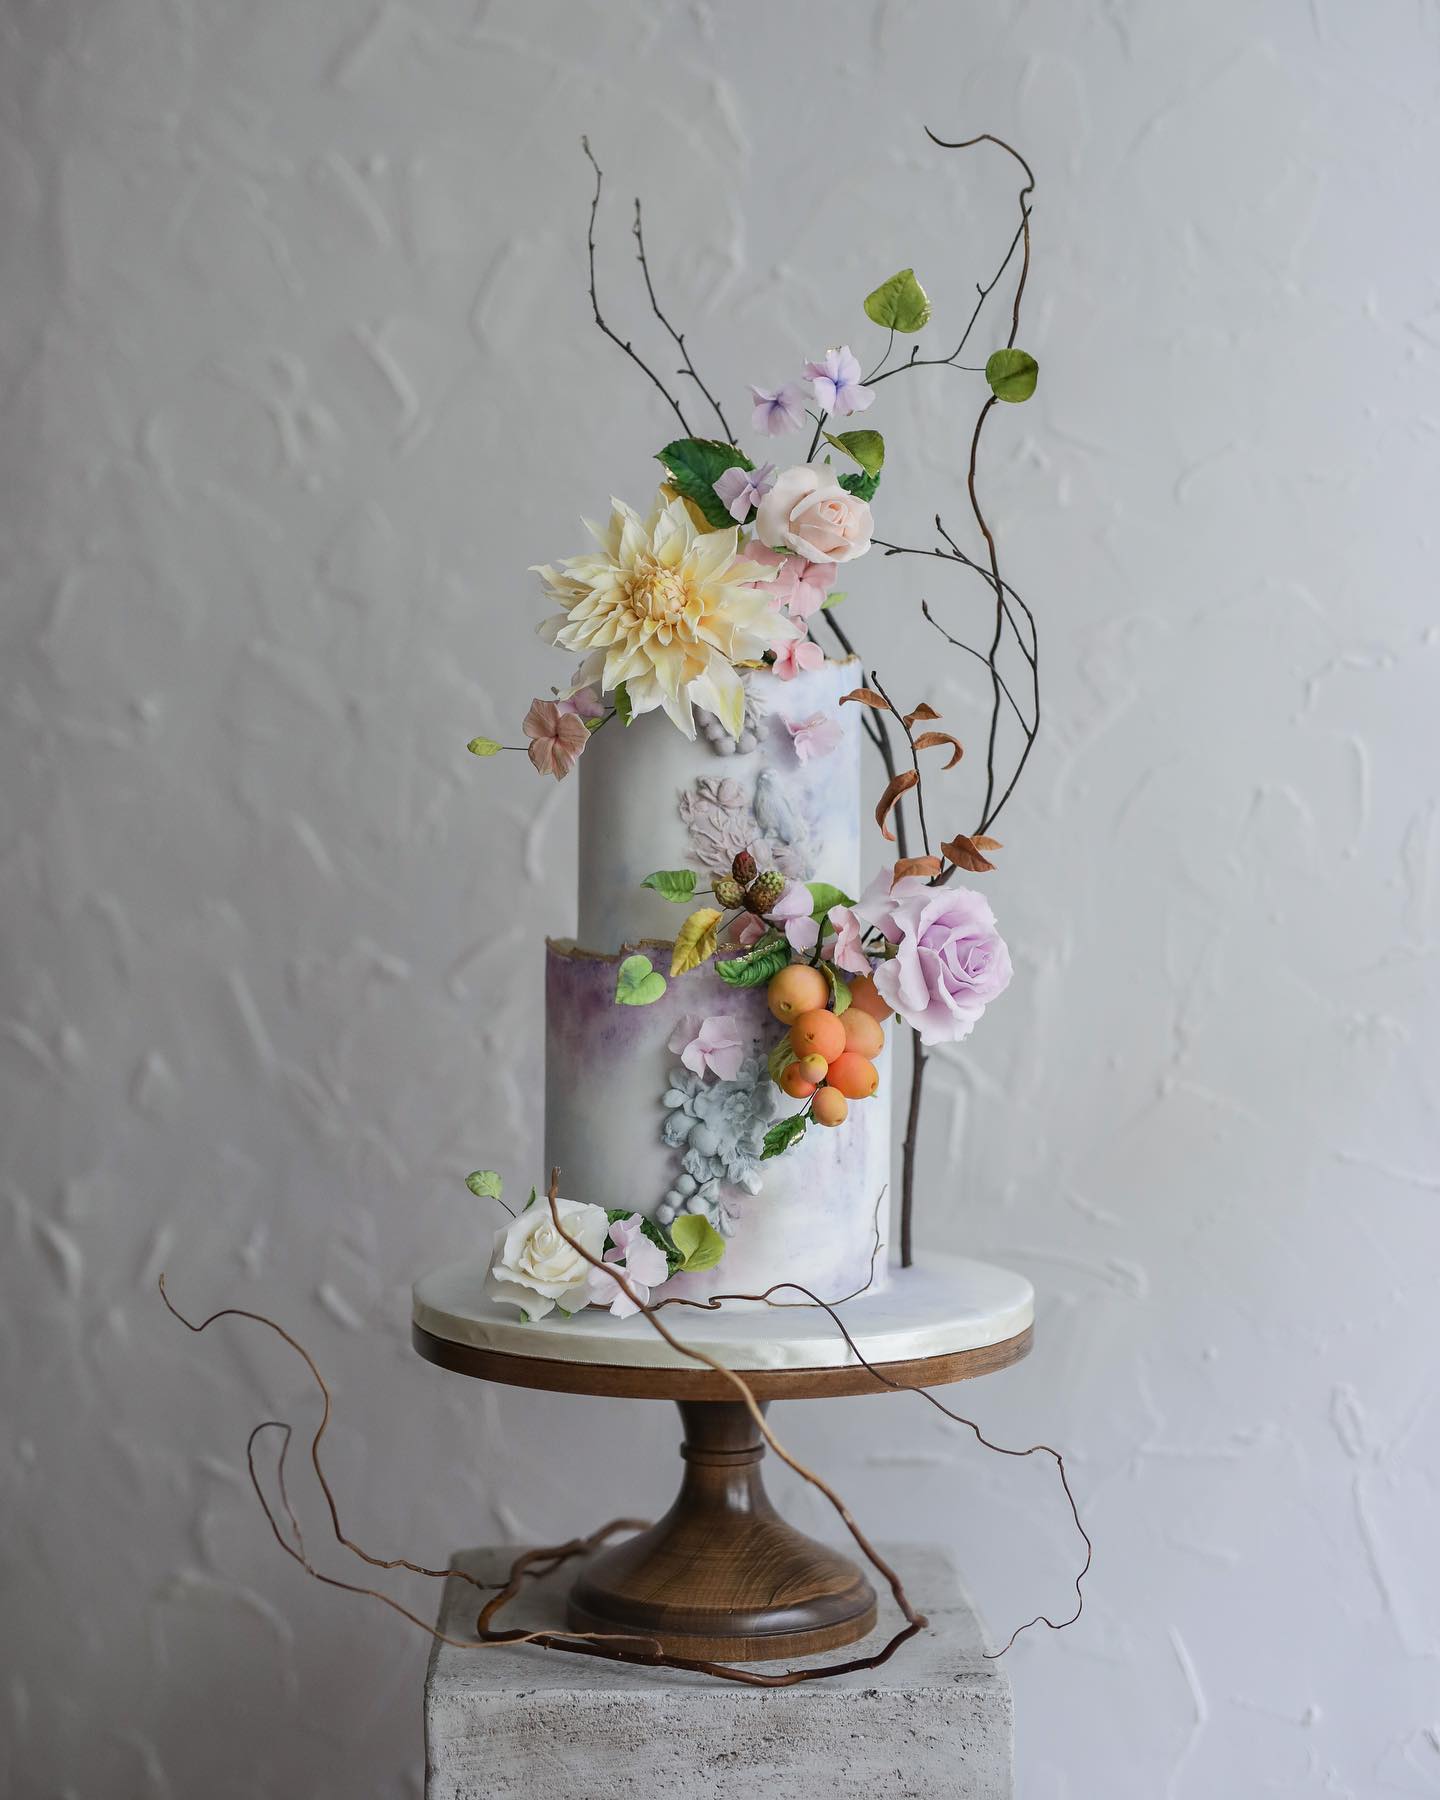 This two tiered cake has a purple marble effect and an array of colour flowers, fruits and foliage as decoration.